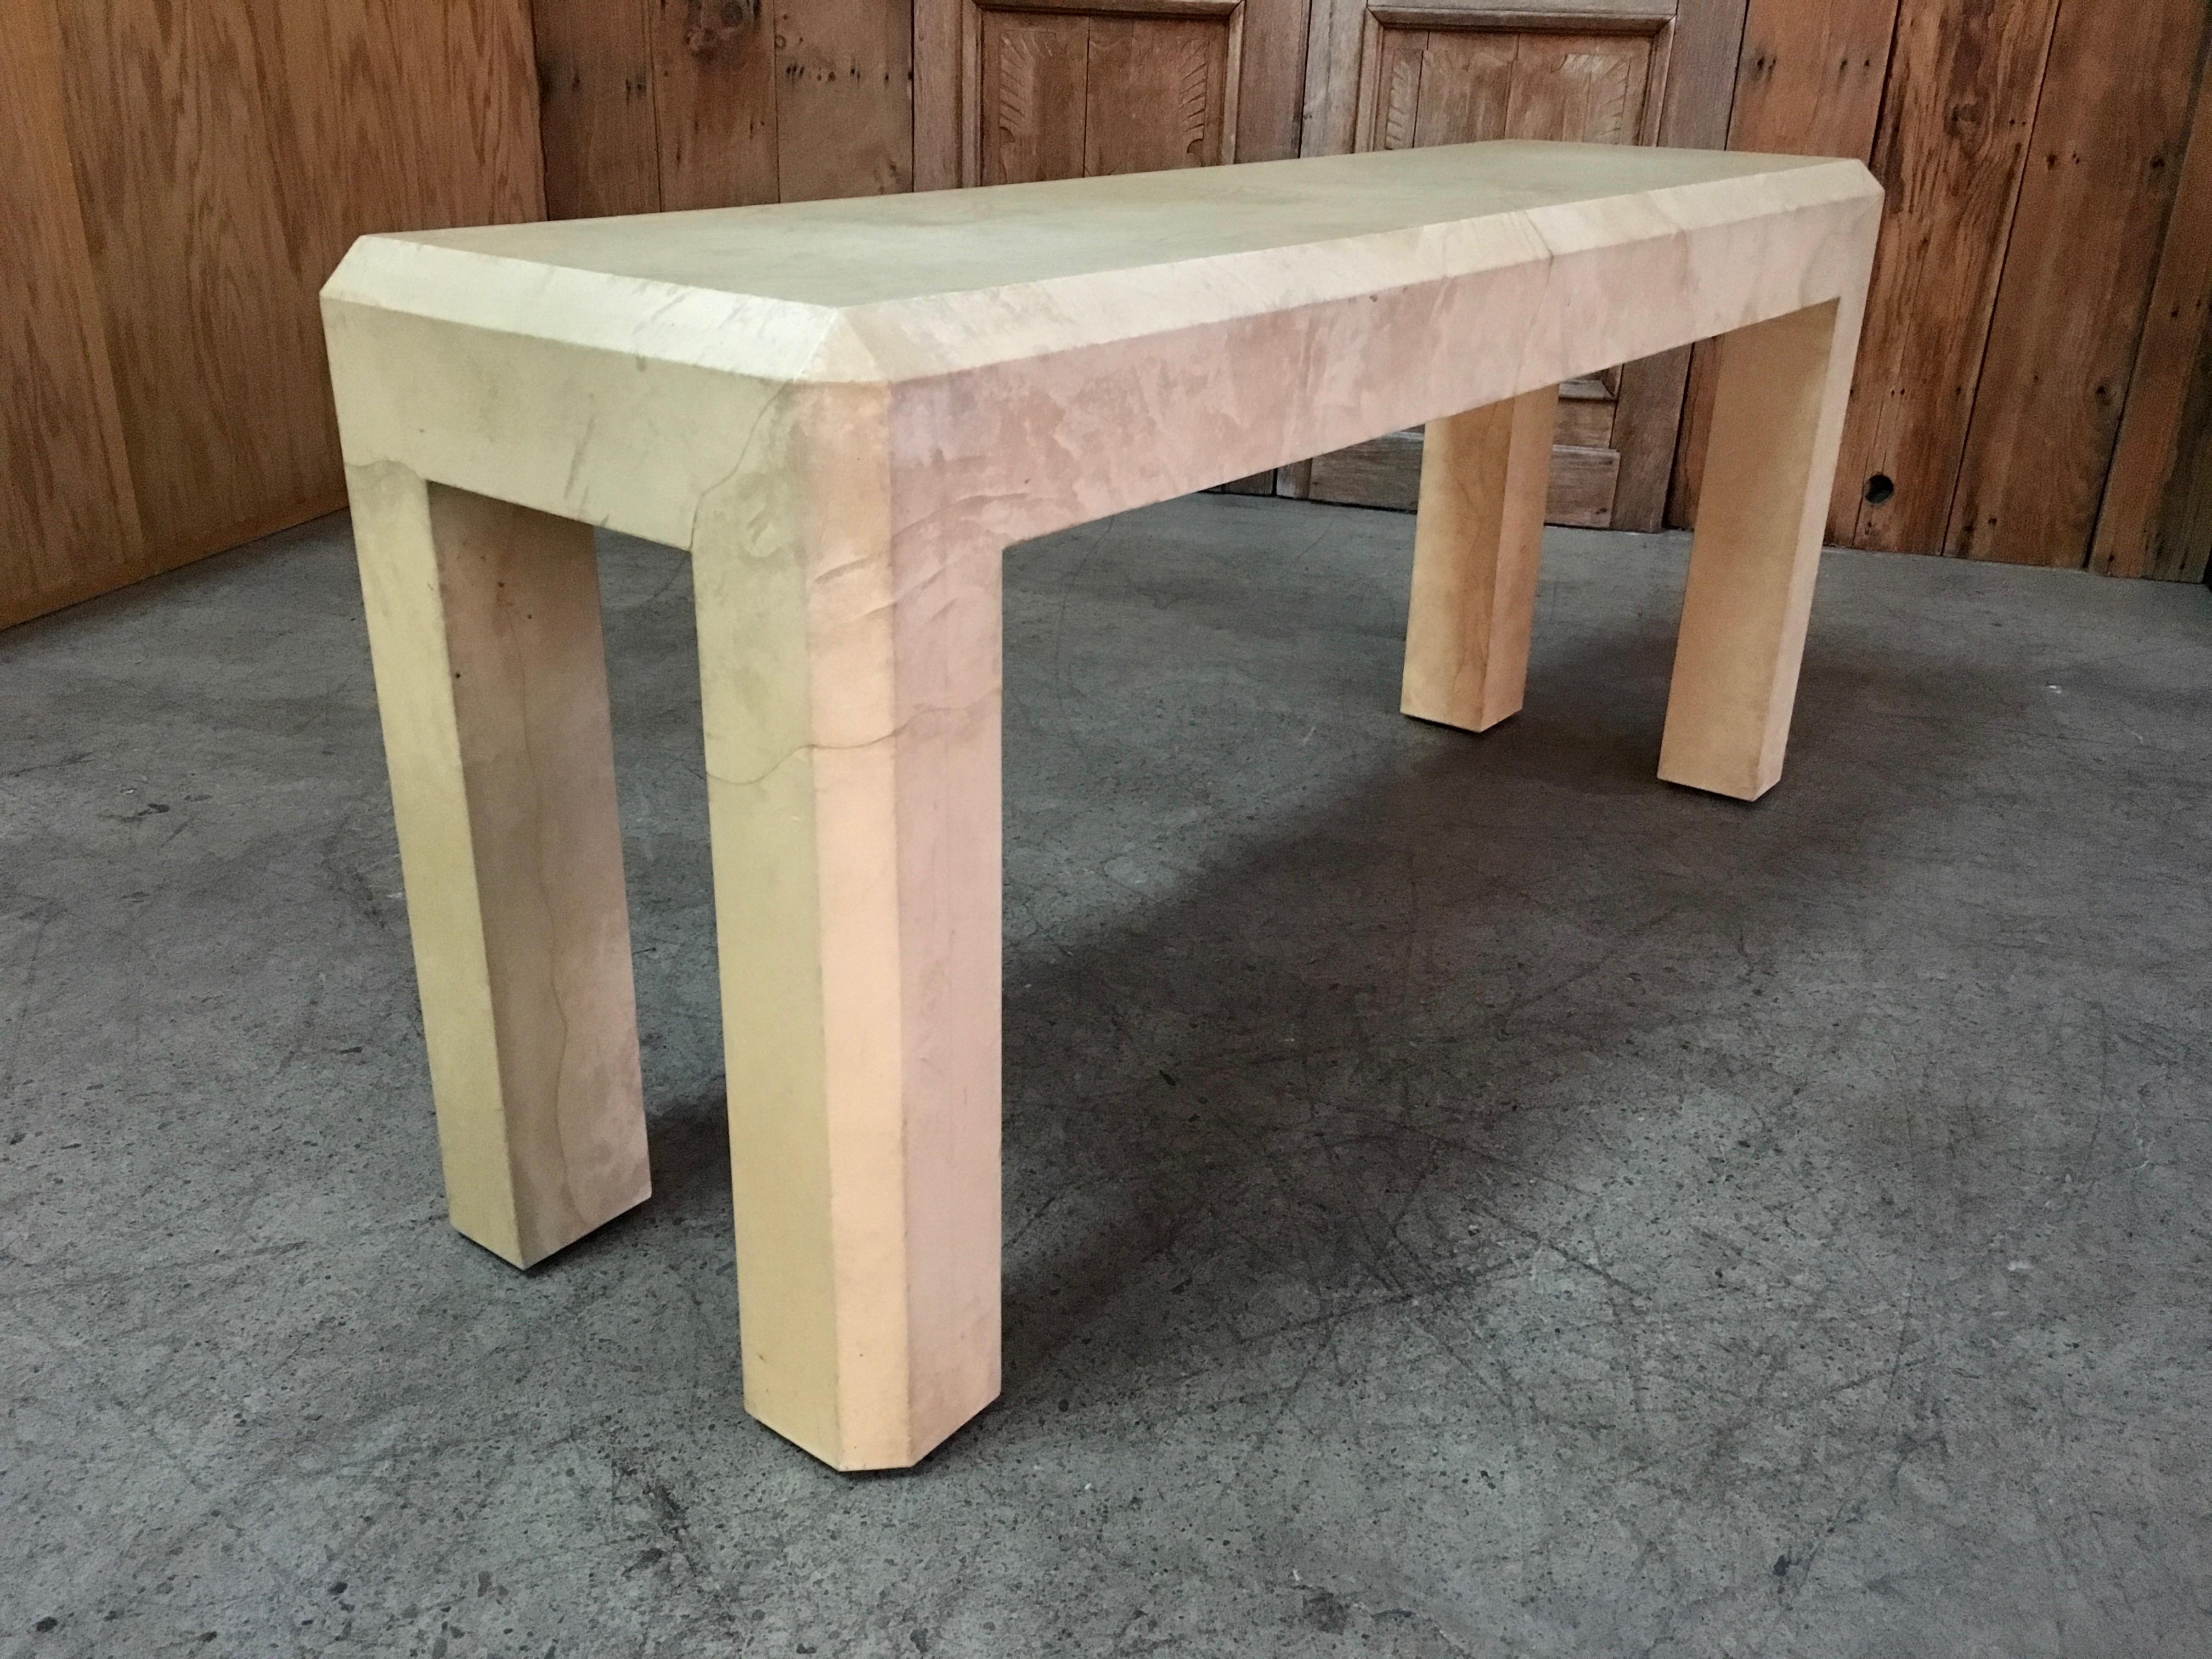 Parchment covered Parsons style console/sofa table with faceted edge design in the style of Steve Chase or Karl Springer.